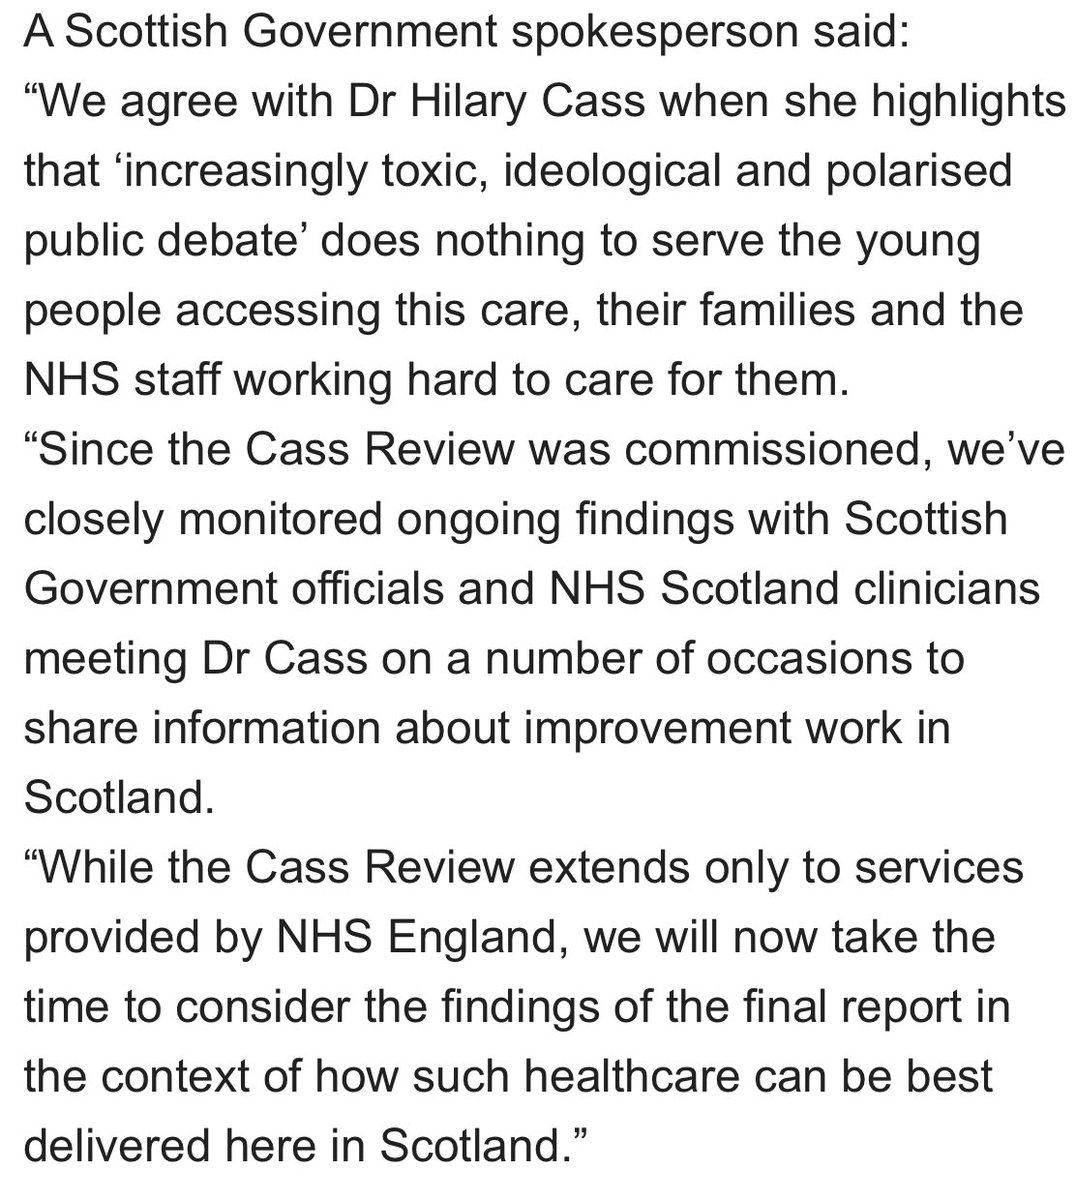 Scottish Government to “take time to consider” a major review suggesting 'remarkably weak evidence' to support gender treatments for children. Cass report says there’s a 'lack of high-quality research' into puberty blockers in young people. @SkyNews